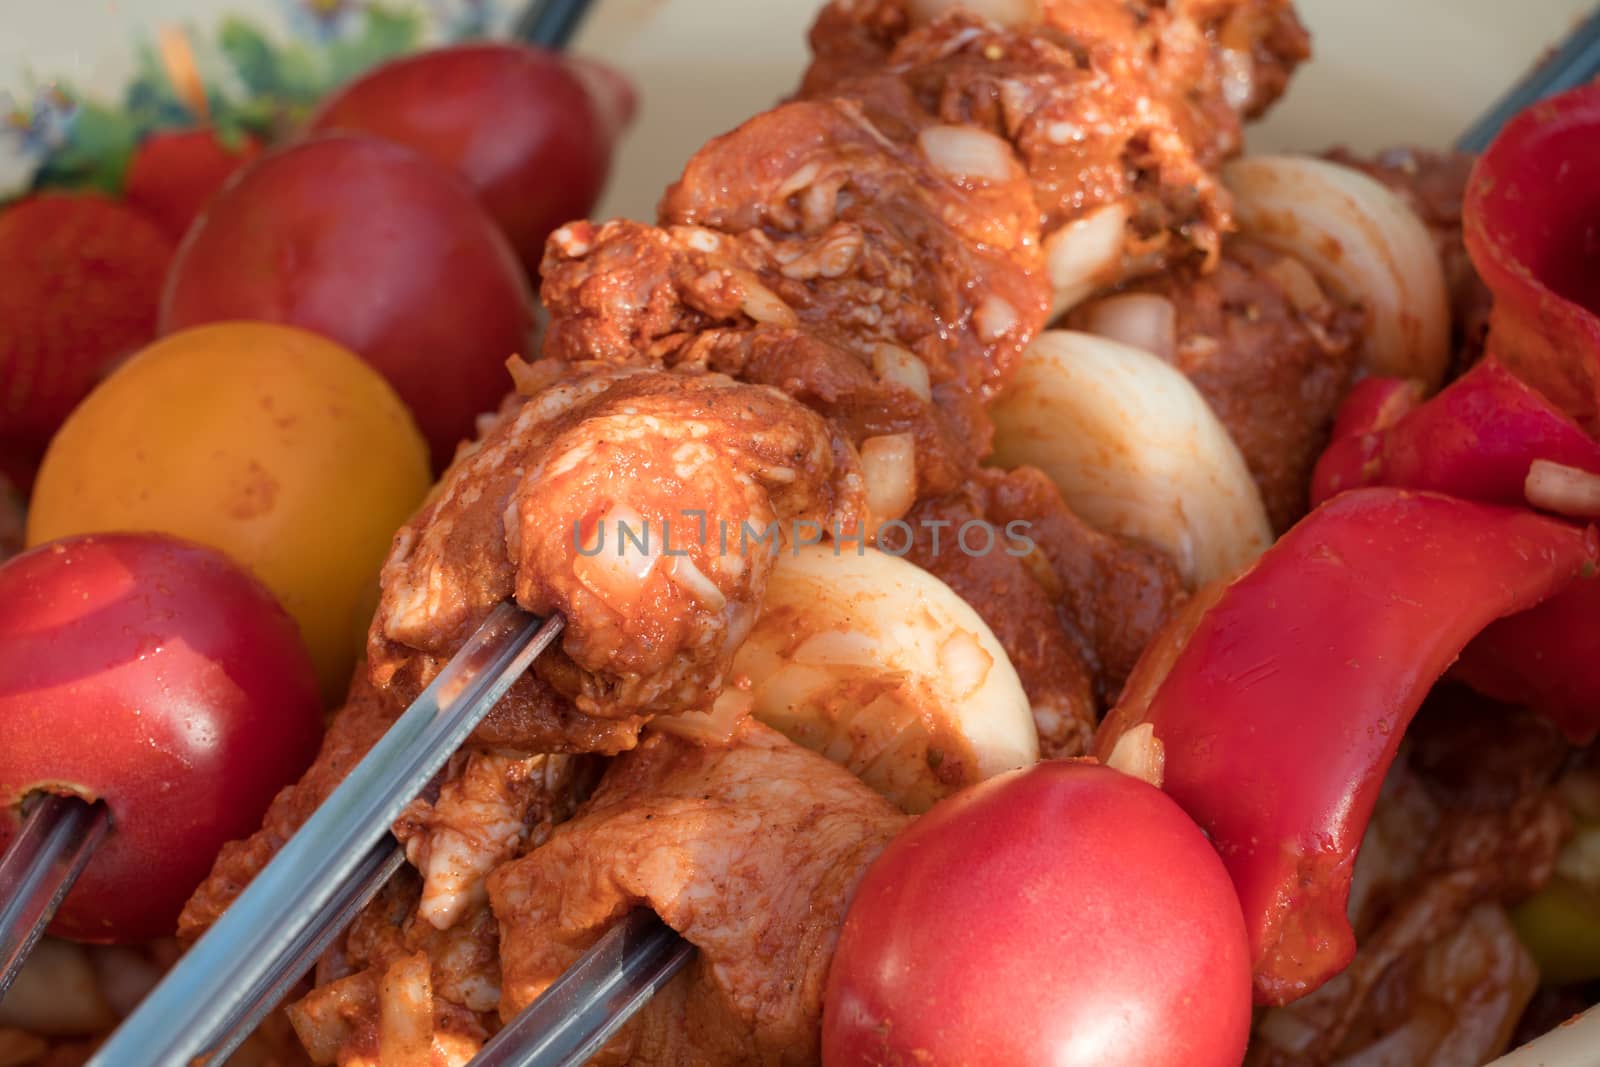 Marinated raw meat for shish kebab, barbecue or grill with onions, tomatoes and bell peppers on skewers. Cooking meat in the grill on skewers in nature in the summer on a picnic.